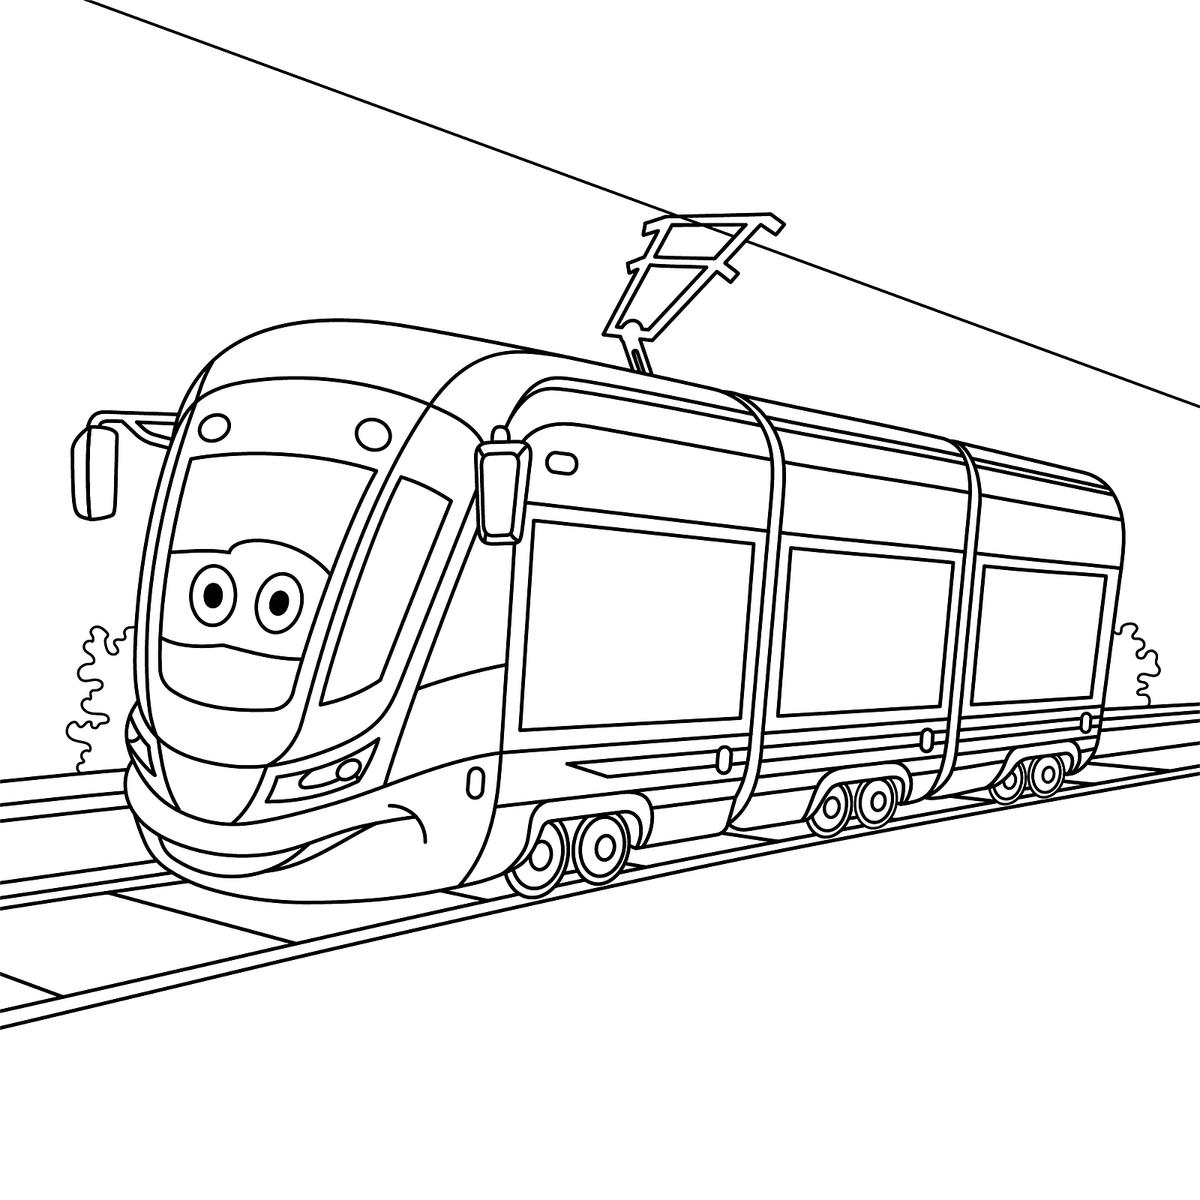 Moving vehicle coloring pages fun cars trucks trains and more printable coloring pages for kids printables mom